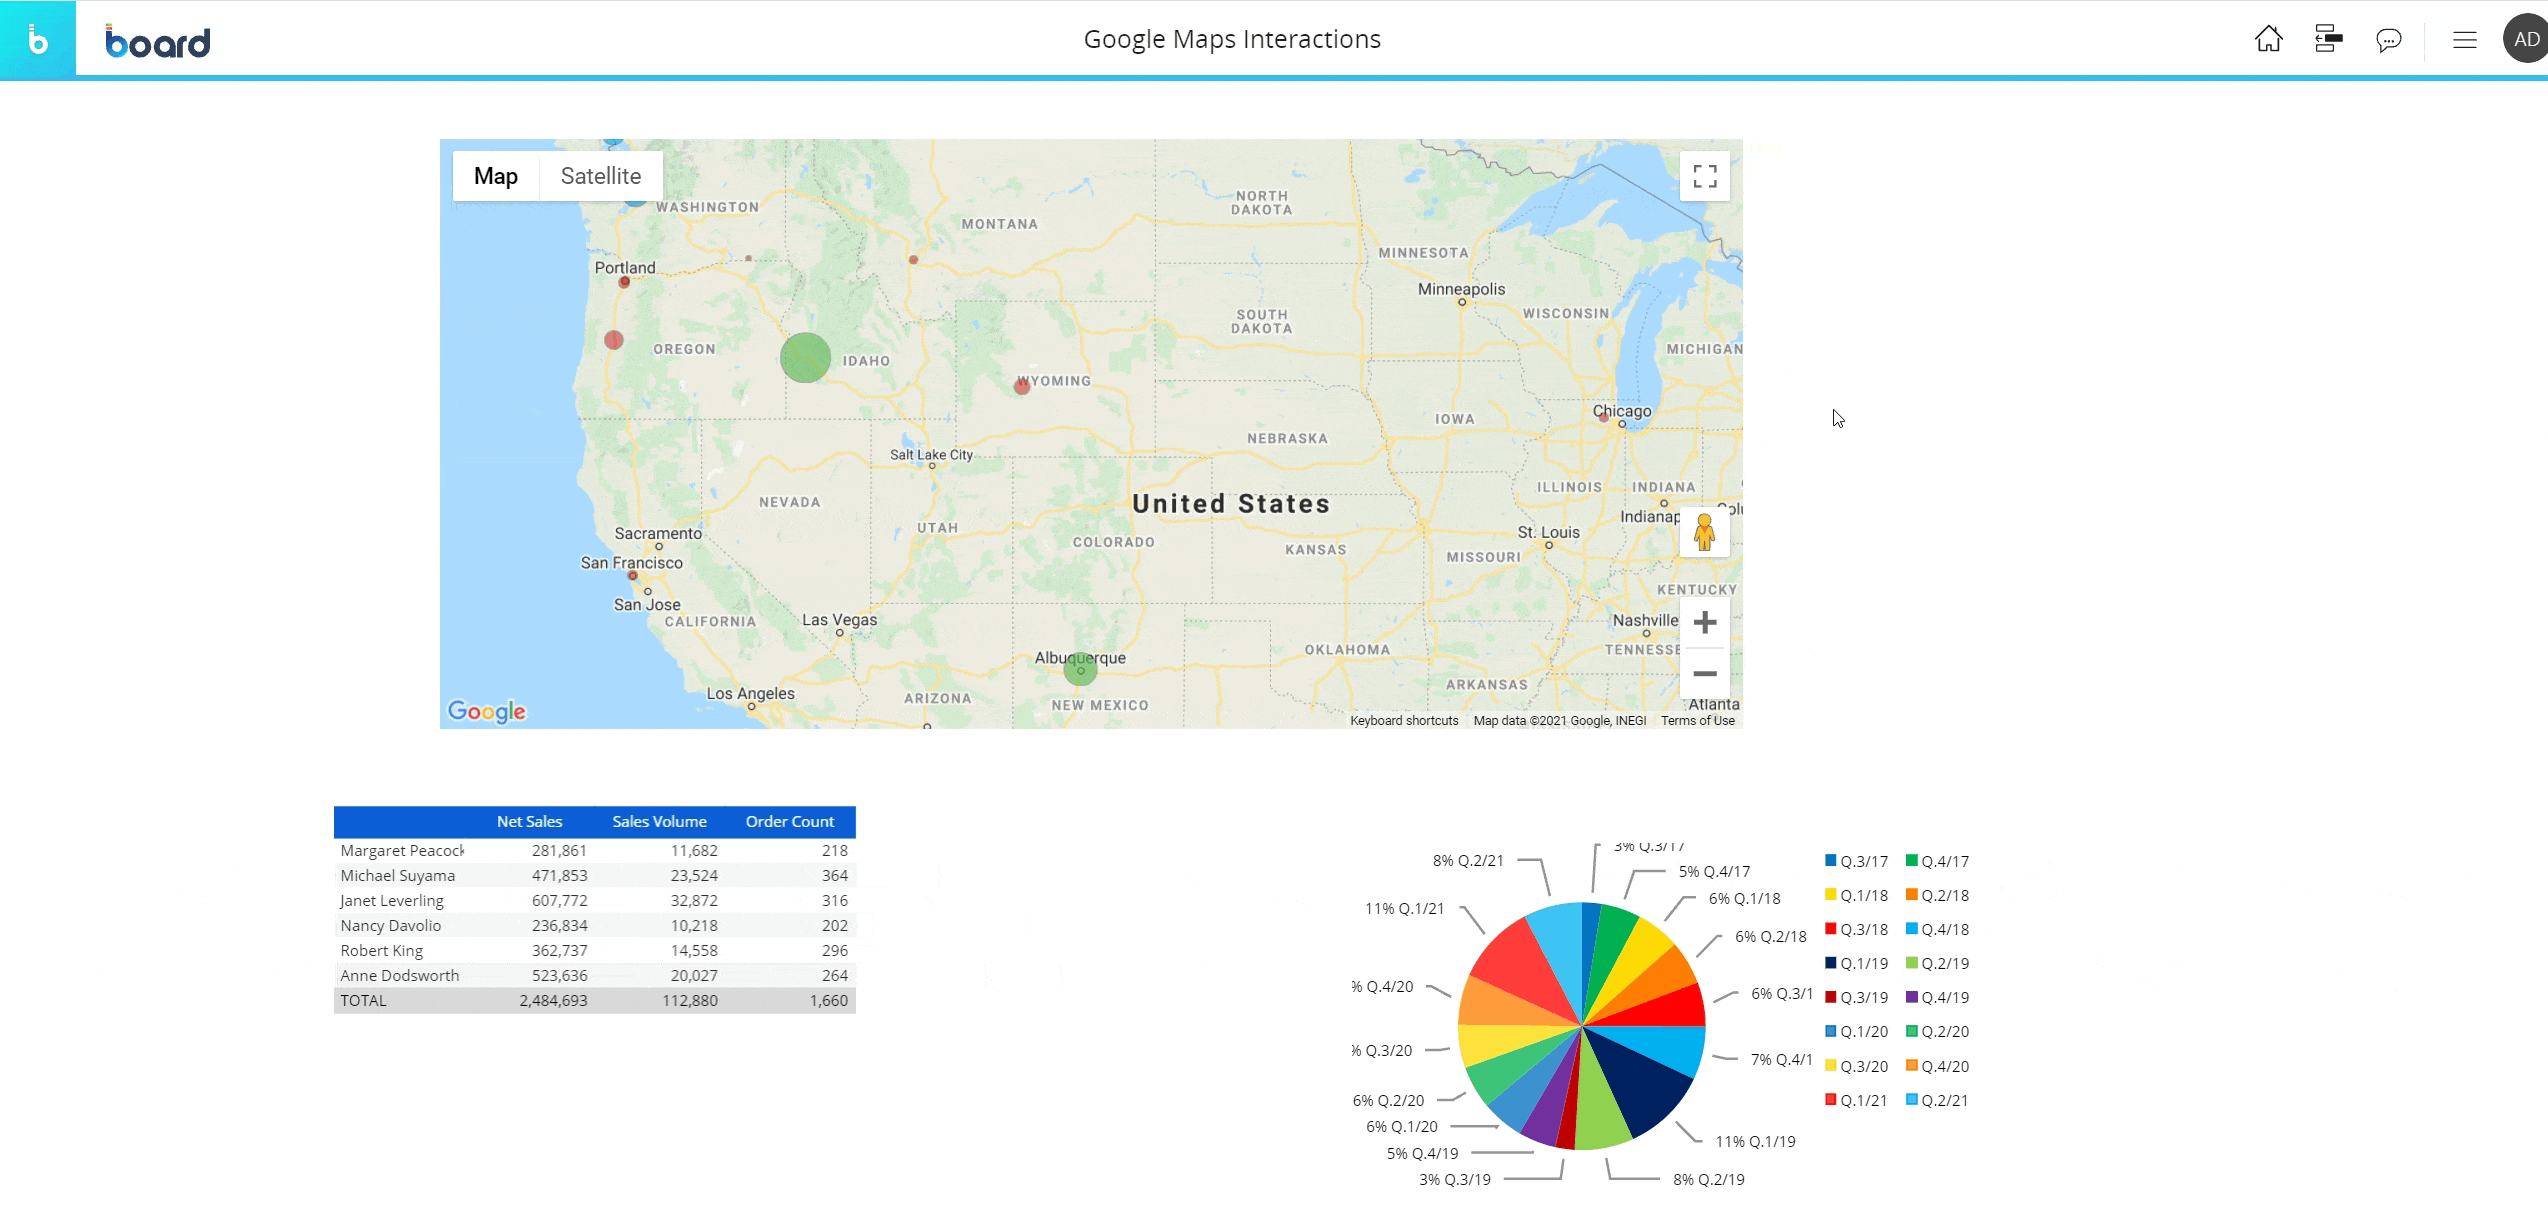 contents/assets/images/assets/images/interactive-sel-gmaps.gif